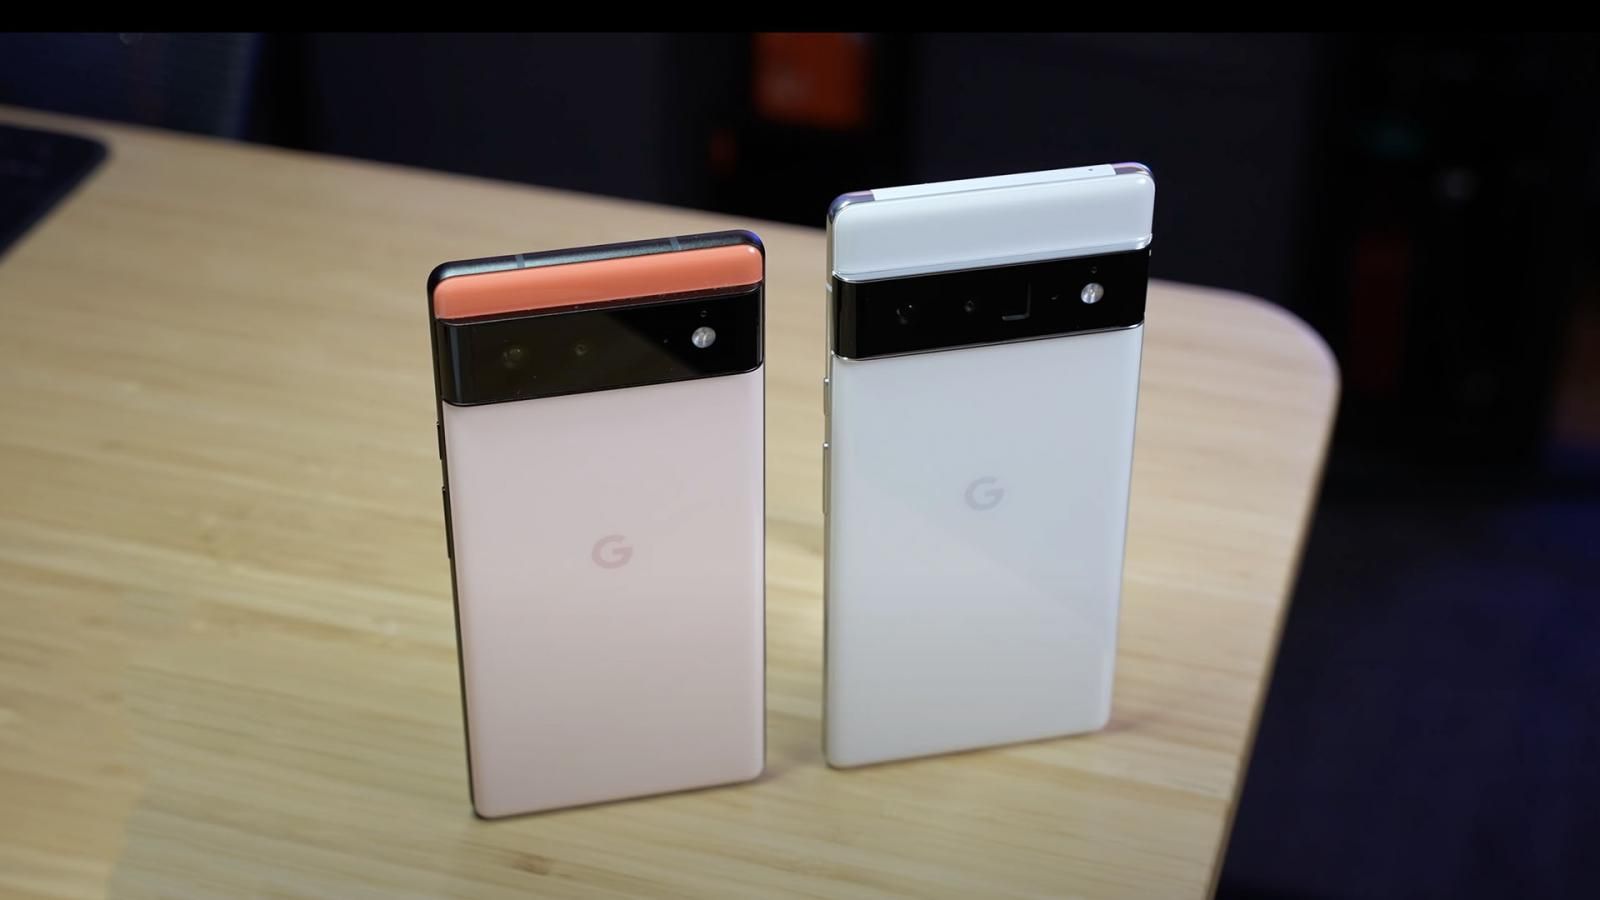 Pixel 6 and Pixel 6 Pro on the table